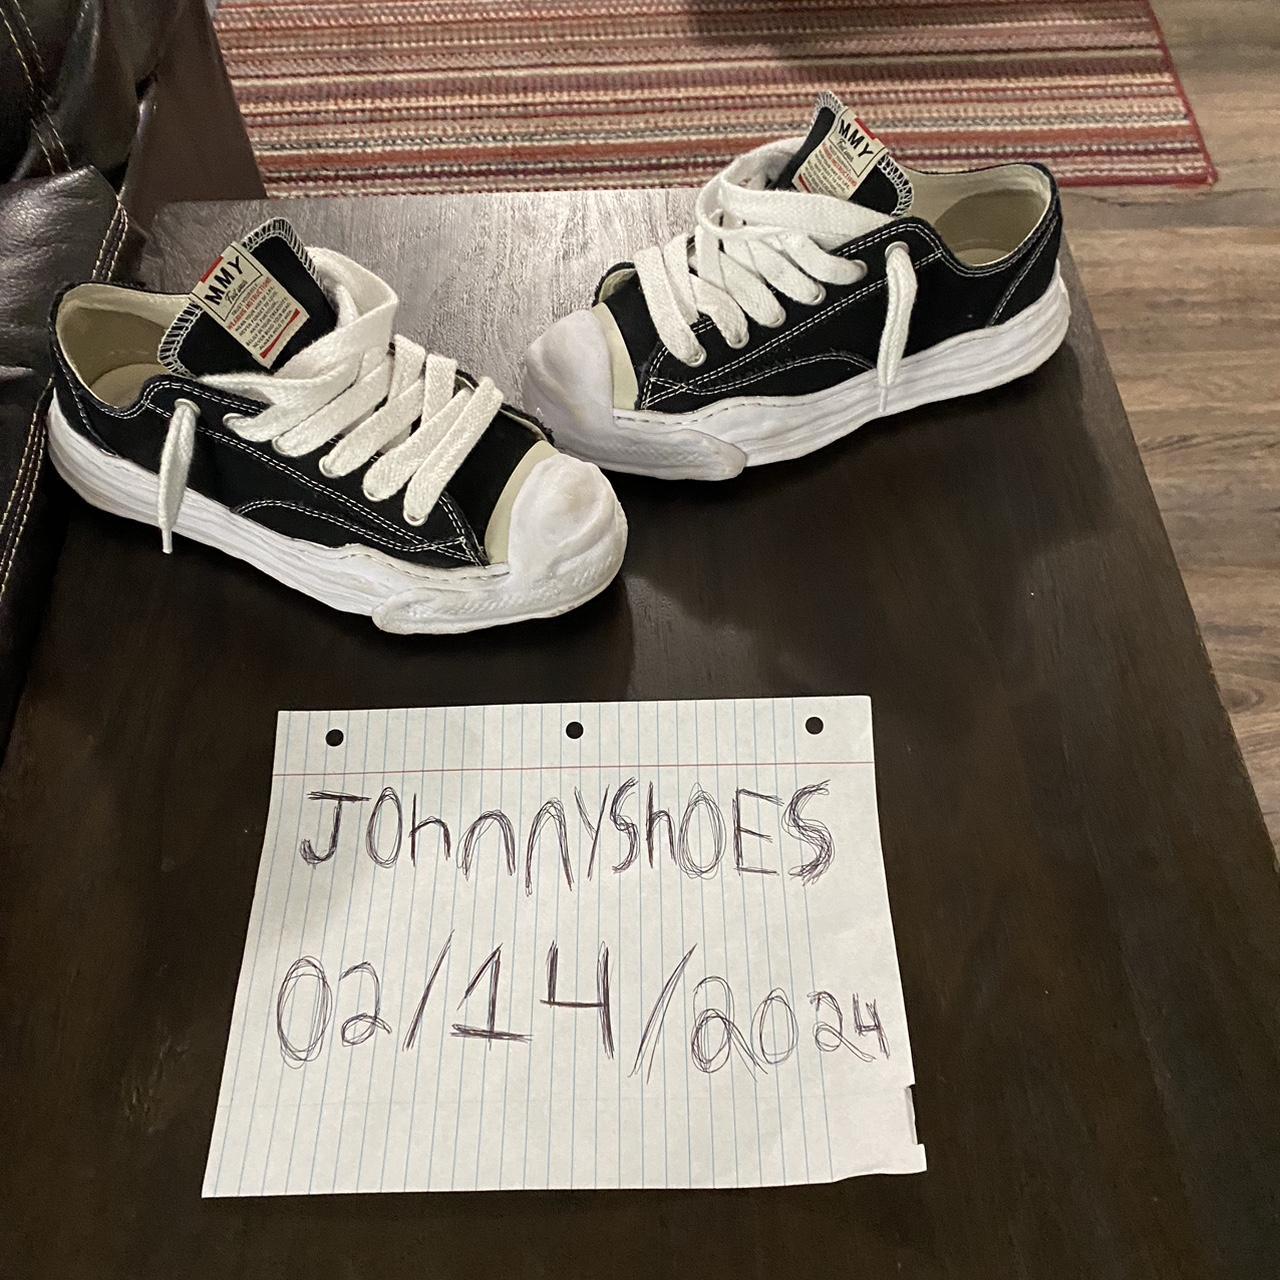 item listed by johnnyshoes